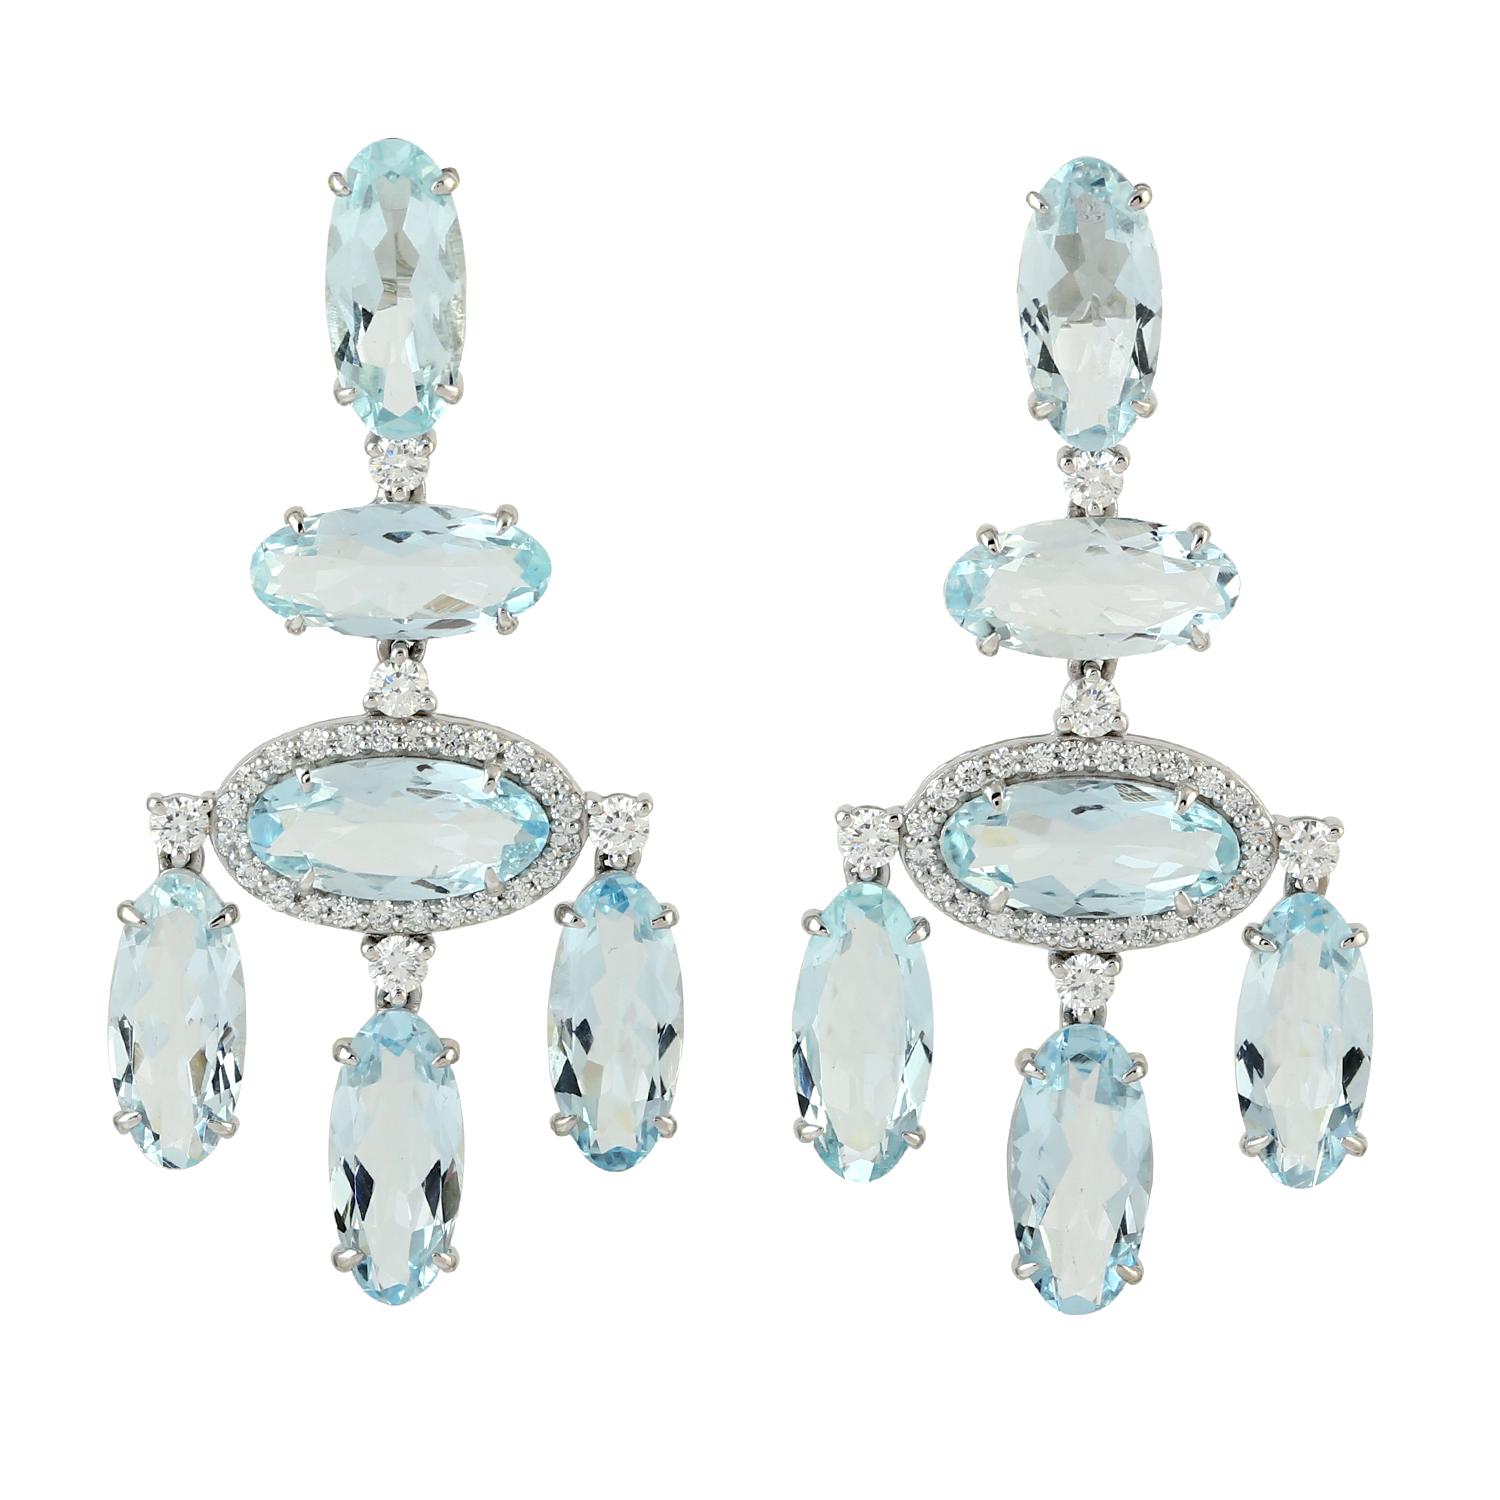 Cast in 14 karat gold, these exquisite earrings are hand set with 12.77 carats blue topaz and .74 carats of glimmering diamonds. 

FOLLOW MEGHNA JEWELS storefront to view the latest collection & exclusive pieces. Meghna Jewels is proudly rated as a